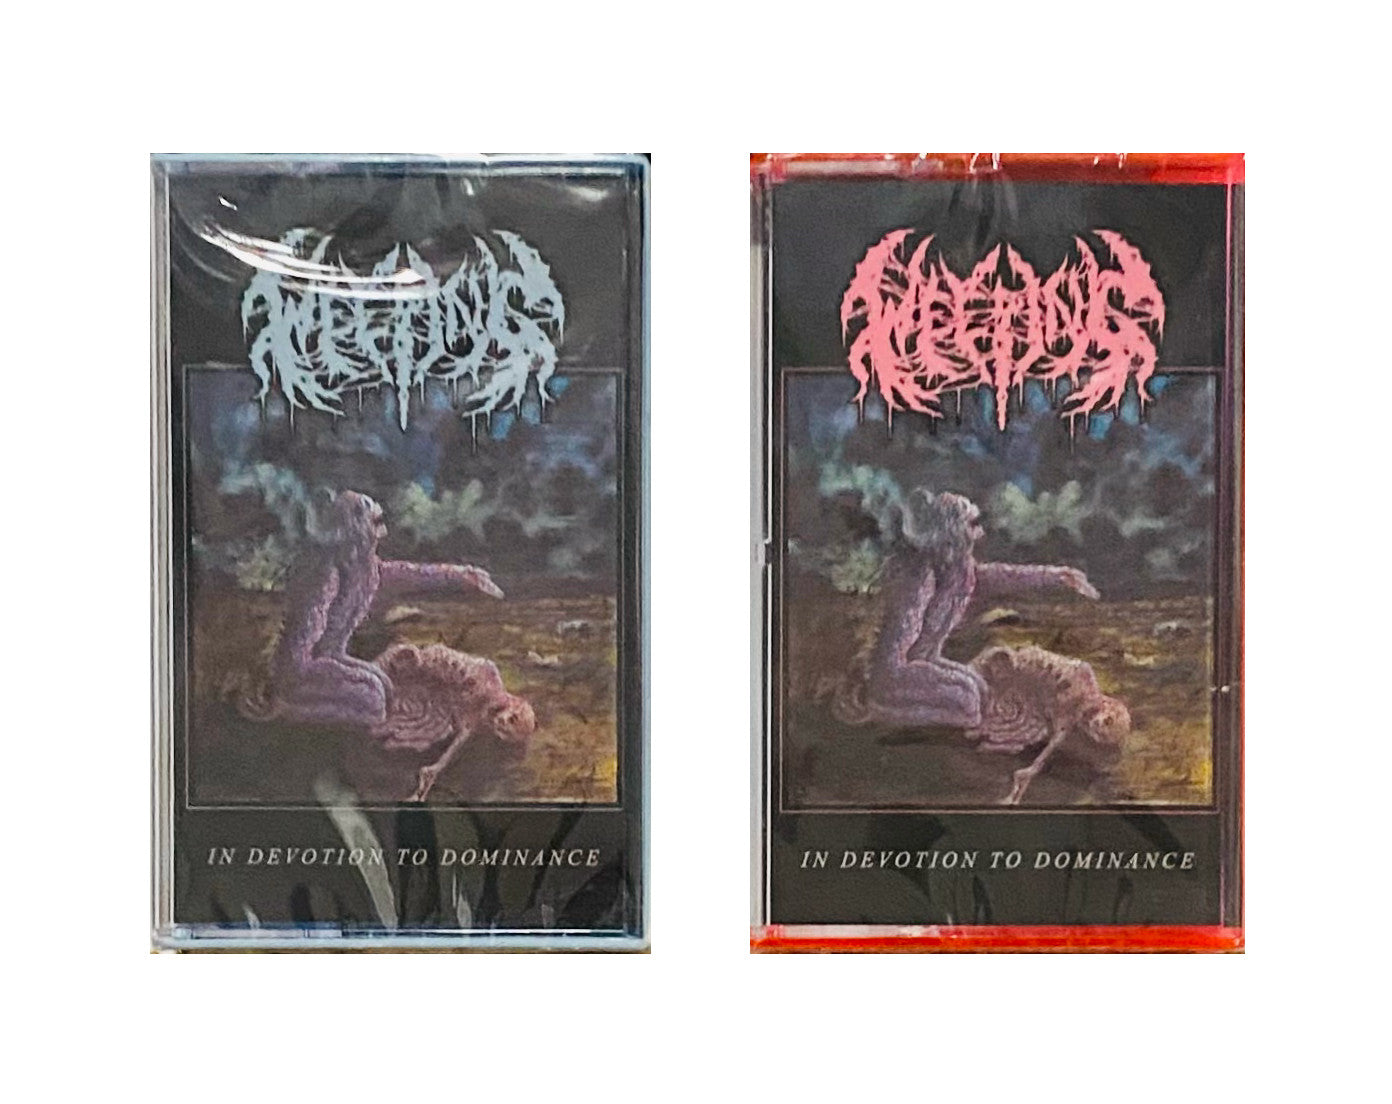 Weeping - In Devotion to Dominance cassette